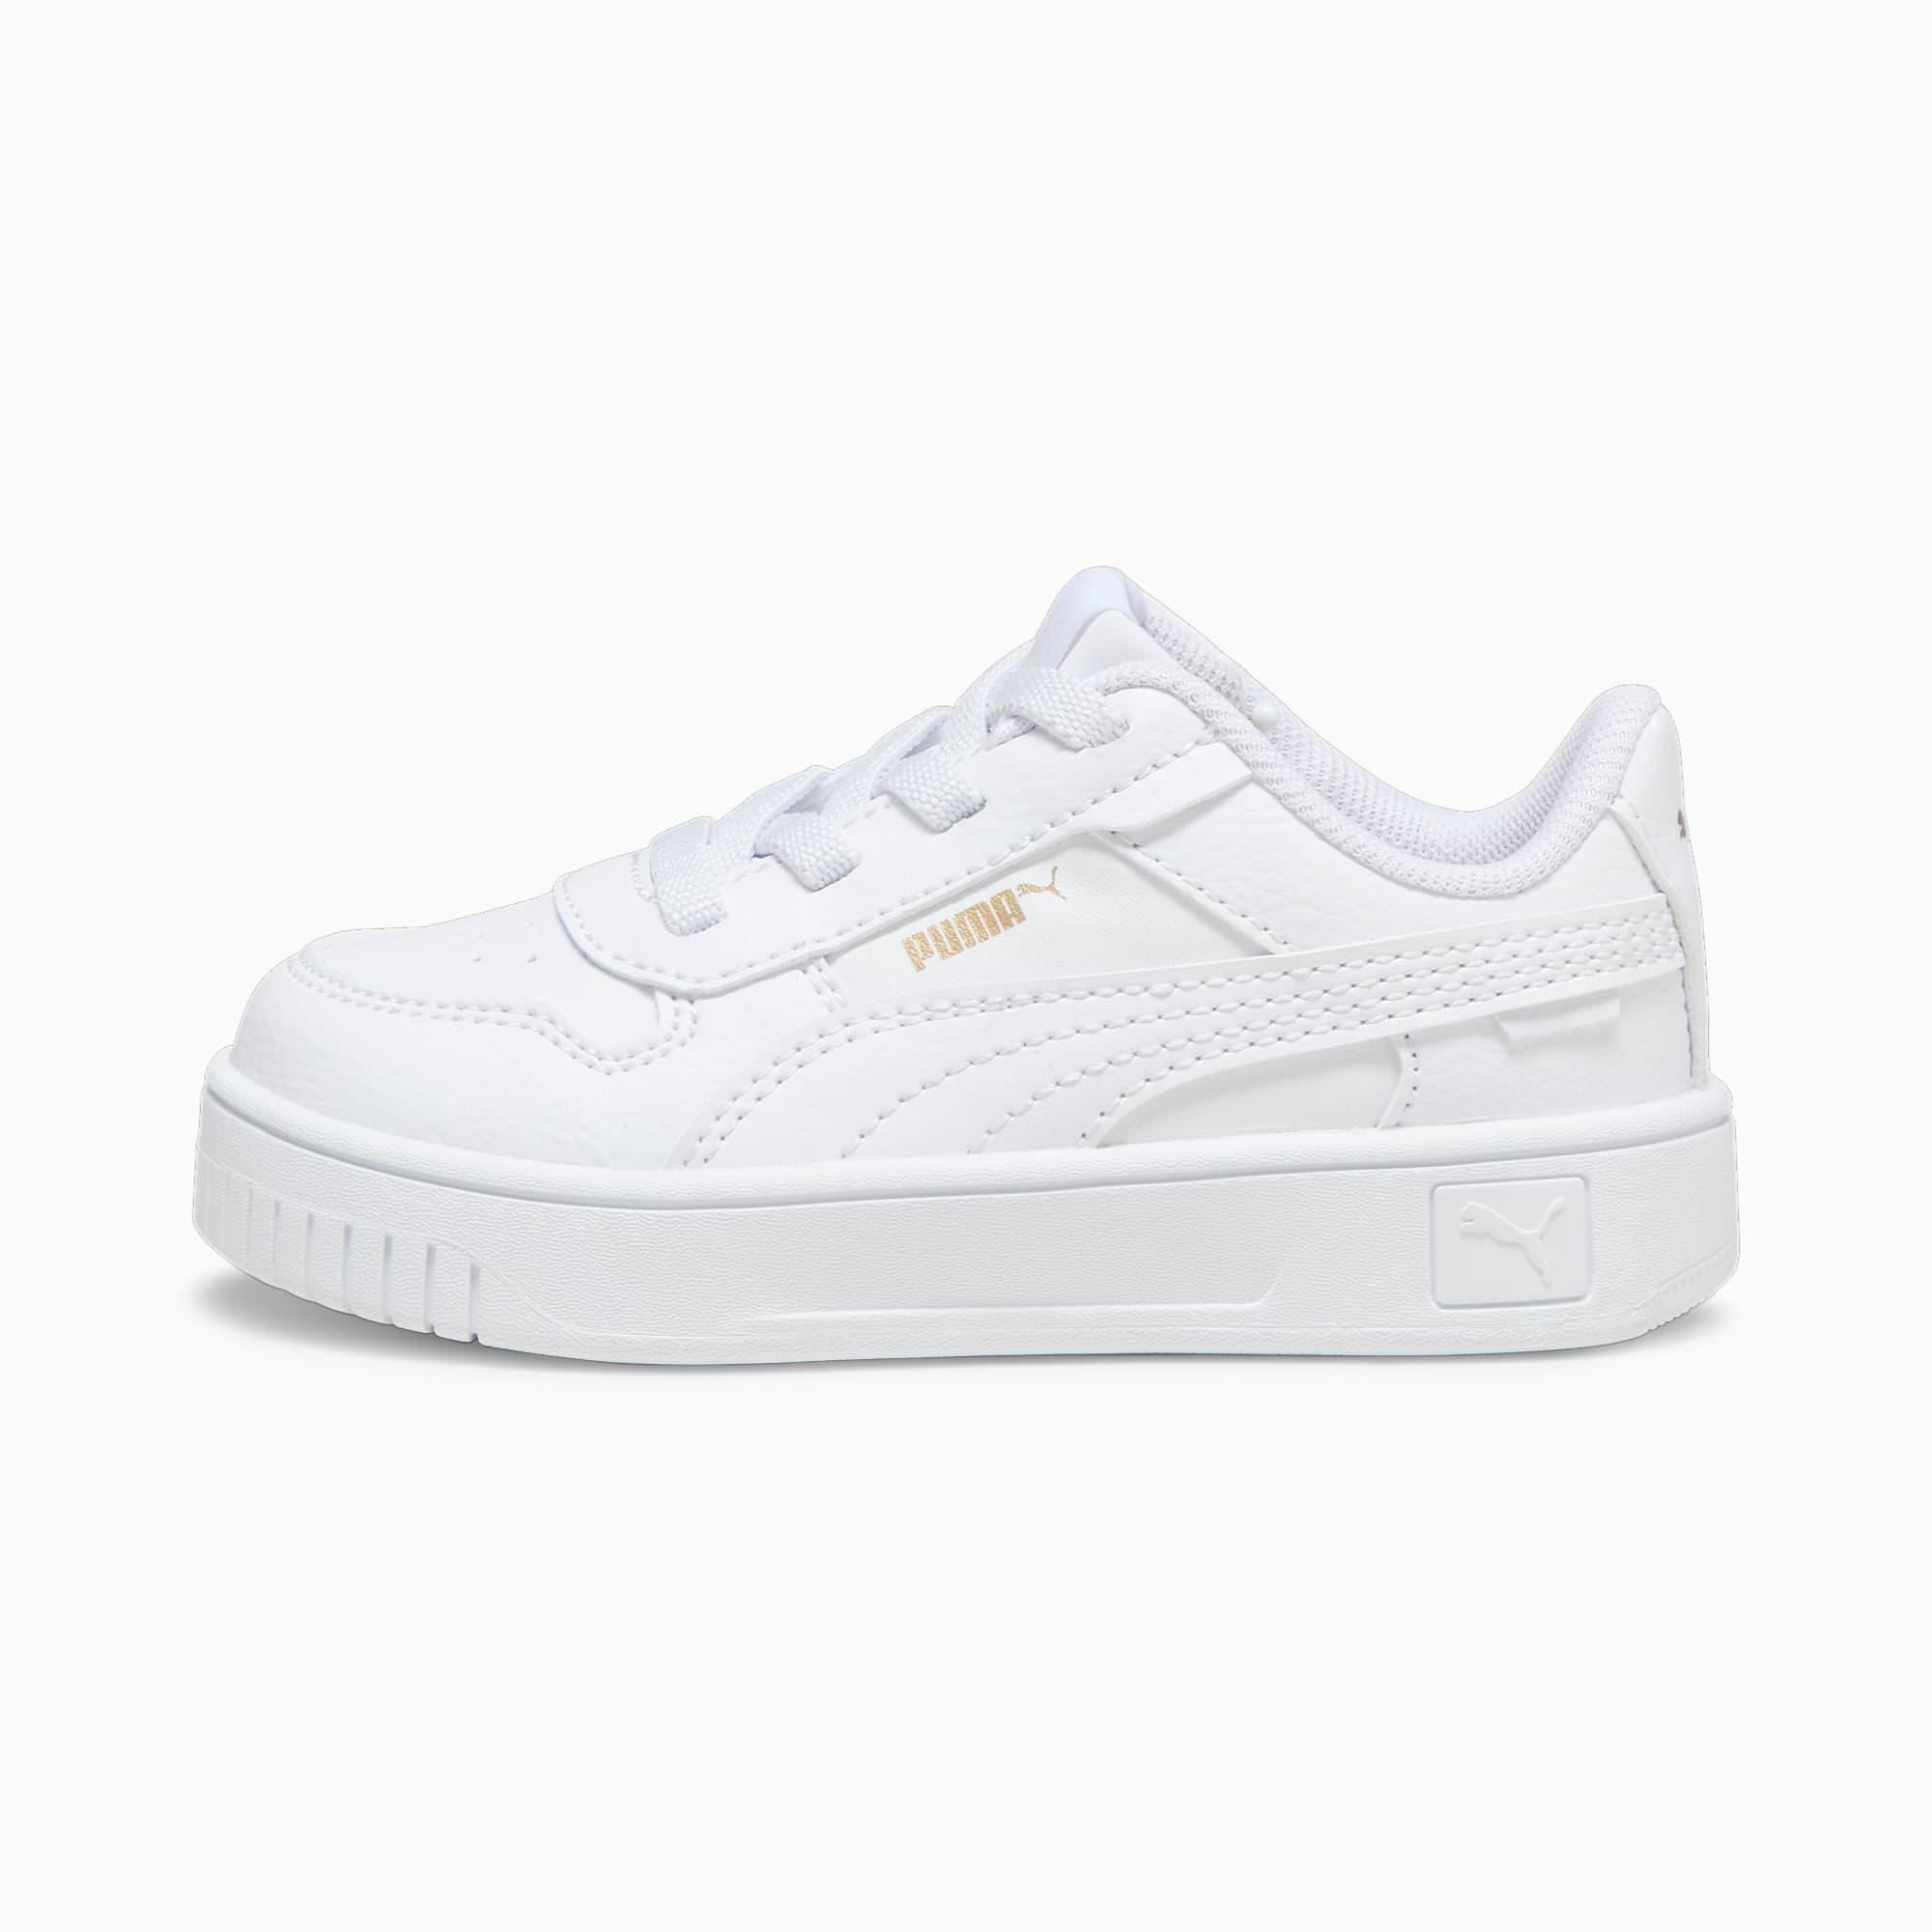 Carina Street Toddlers' Sneakers by PUMA